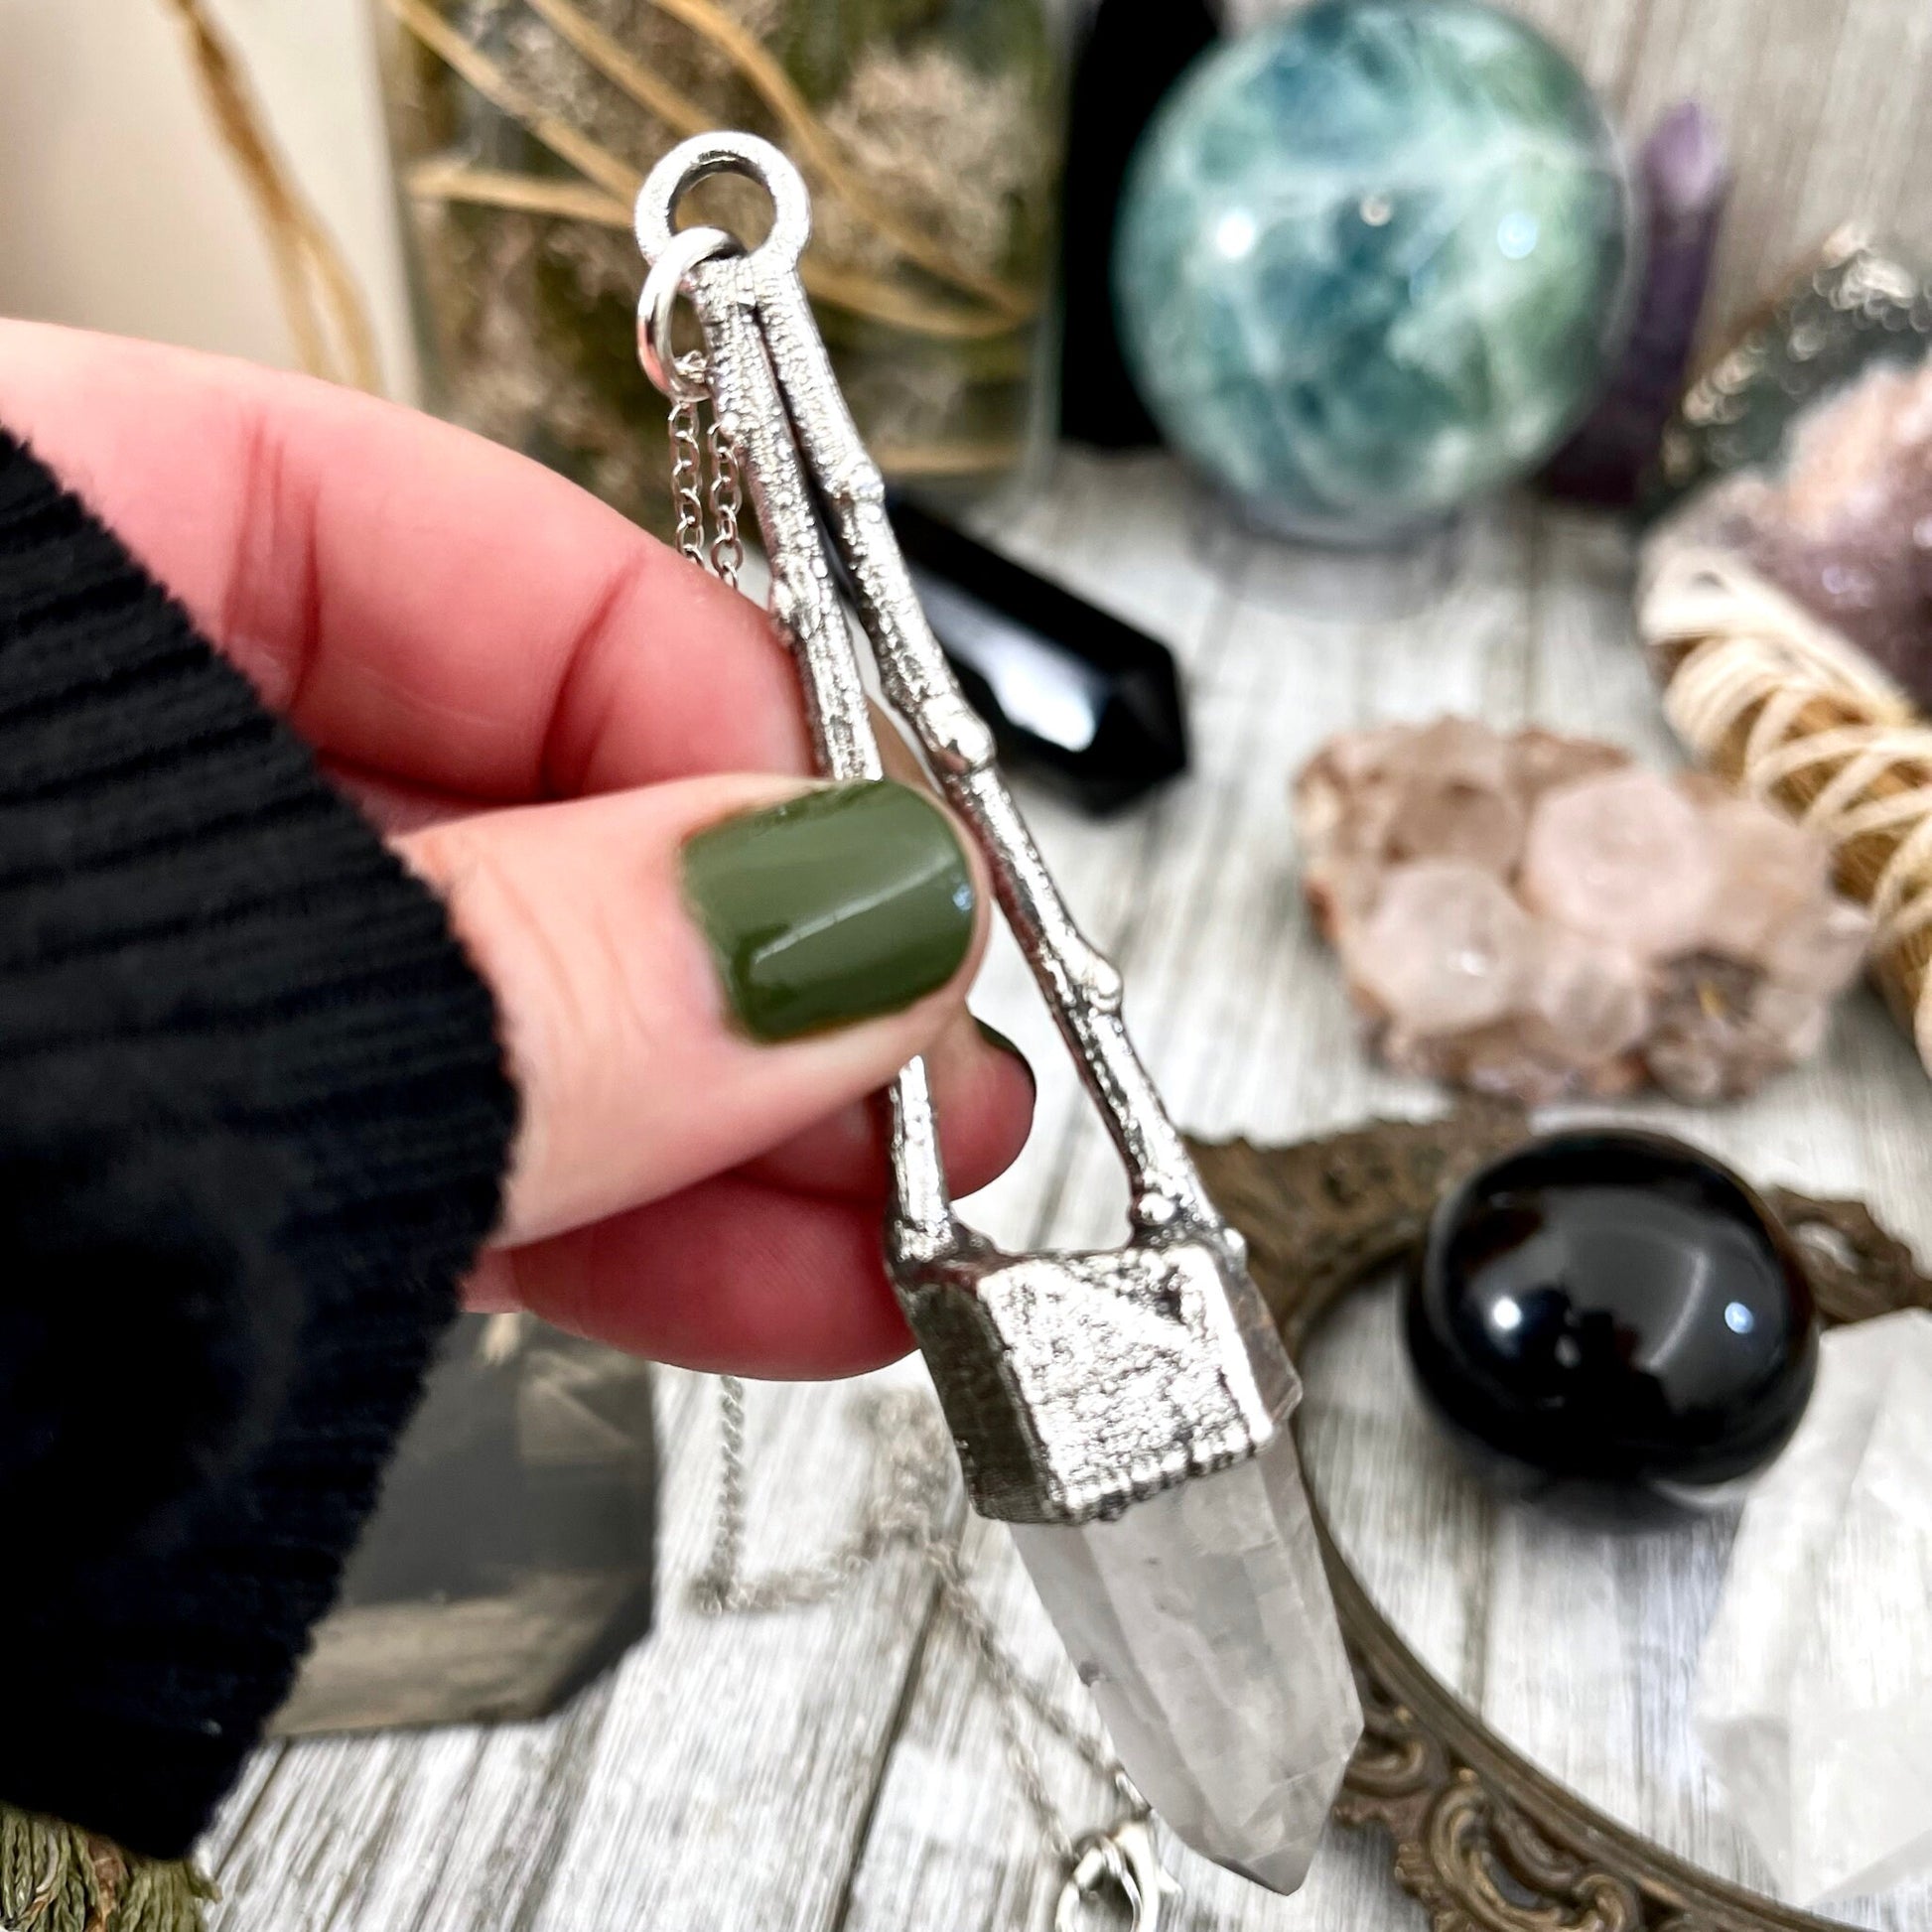 big crystal Necklace, Big Gothic Necklace, Bohemian Jewelry, Crystal Necklaces, Crystal Pendant, Etsy ID: 1650750684, FOXLARK- NECKLACES, Jewelry, nature inspired, Necklaces, Raw Clear Quartz, Silver Jewelry, Silver Necklace, Silver Stone Jewelry, Stateme